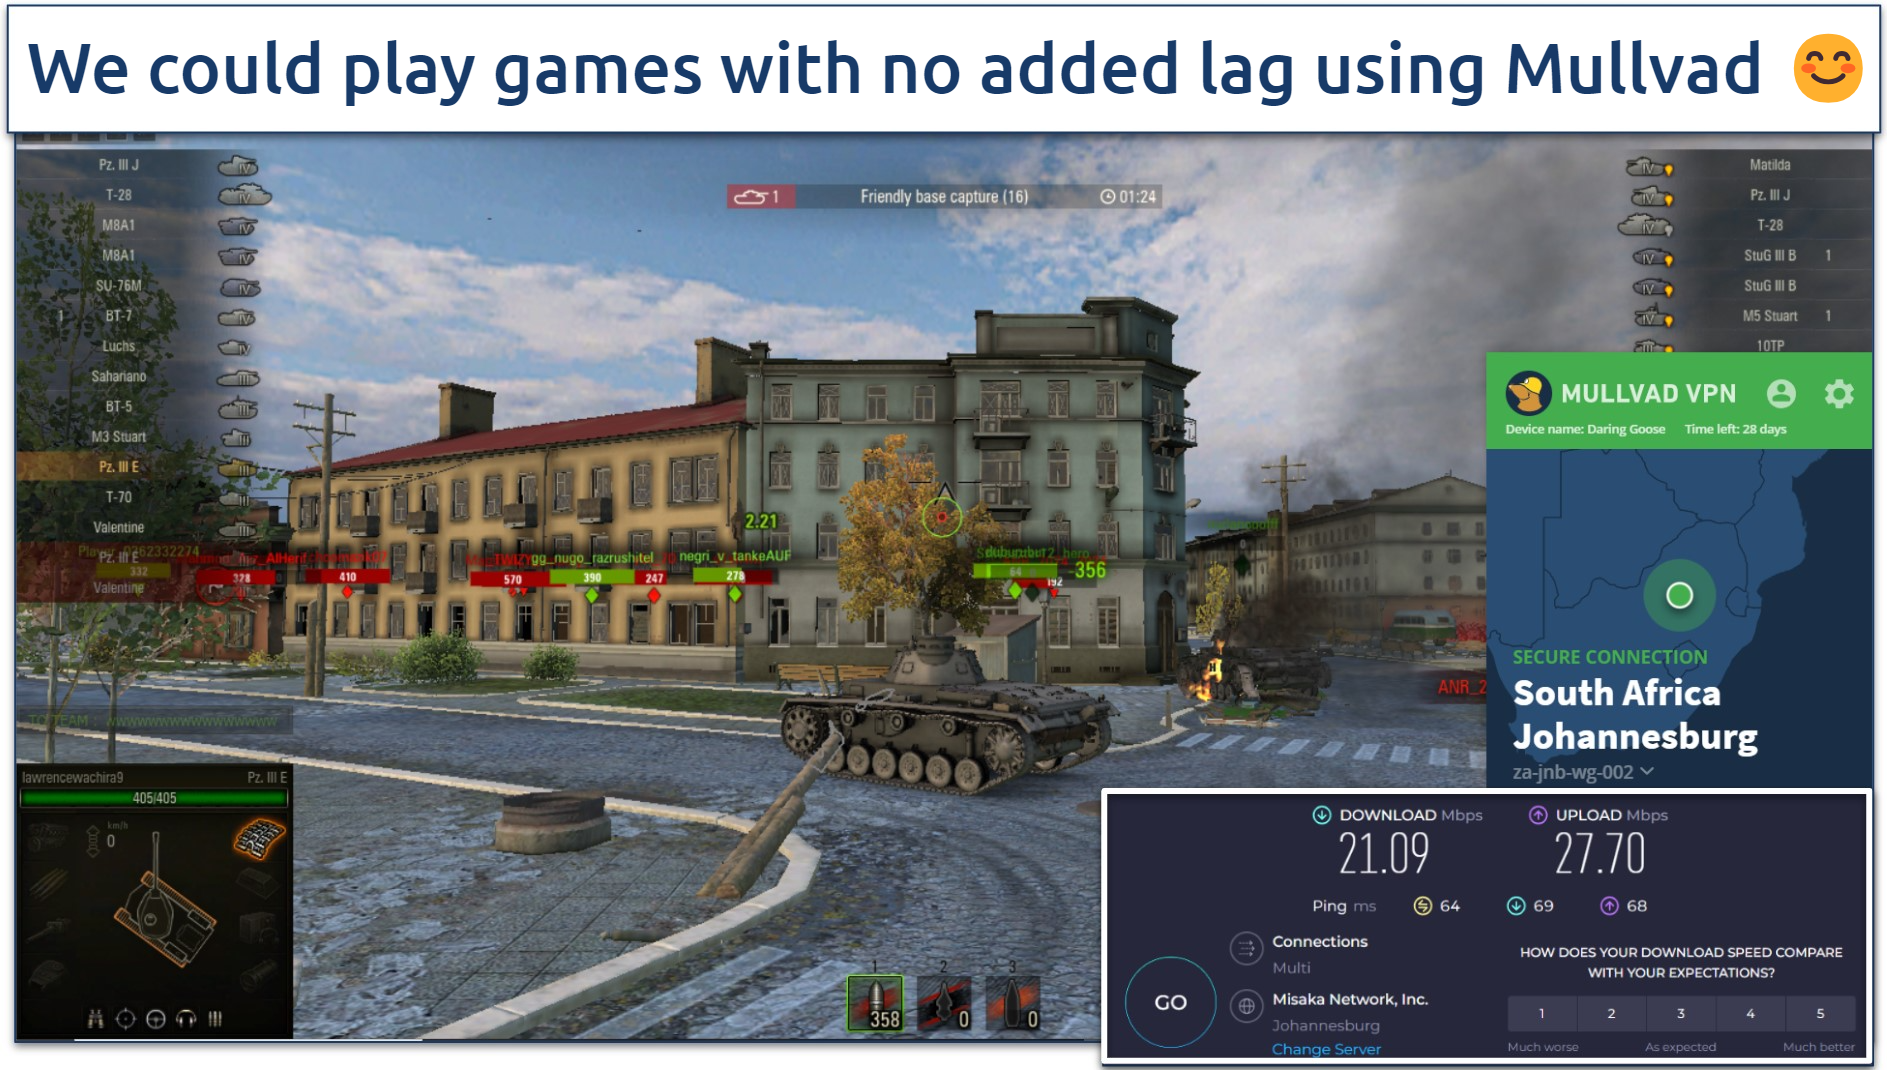 Screenshot of World of Tanks being played while connected to Mullvad's Johannesburg South Africa server